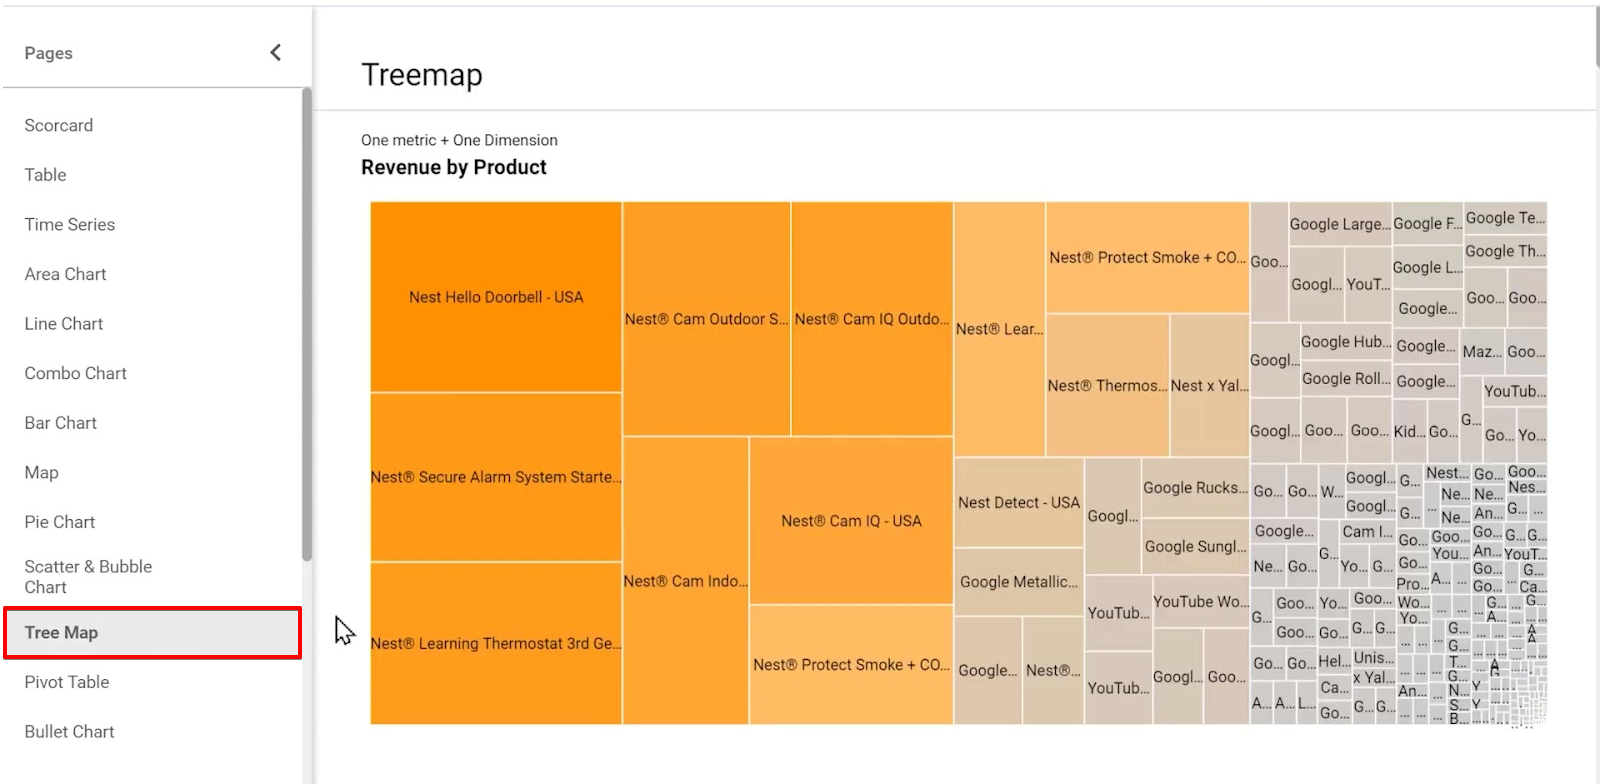 Analyzing treemap chart as a medium to access data in a report in GDS